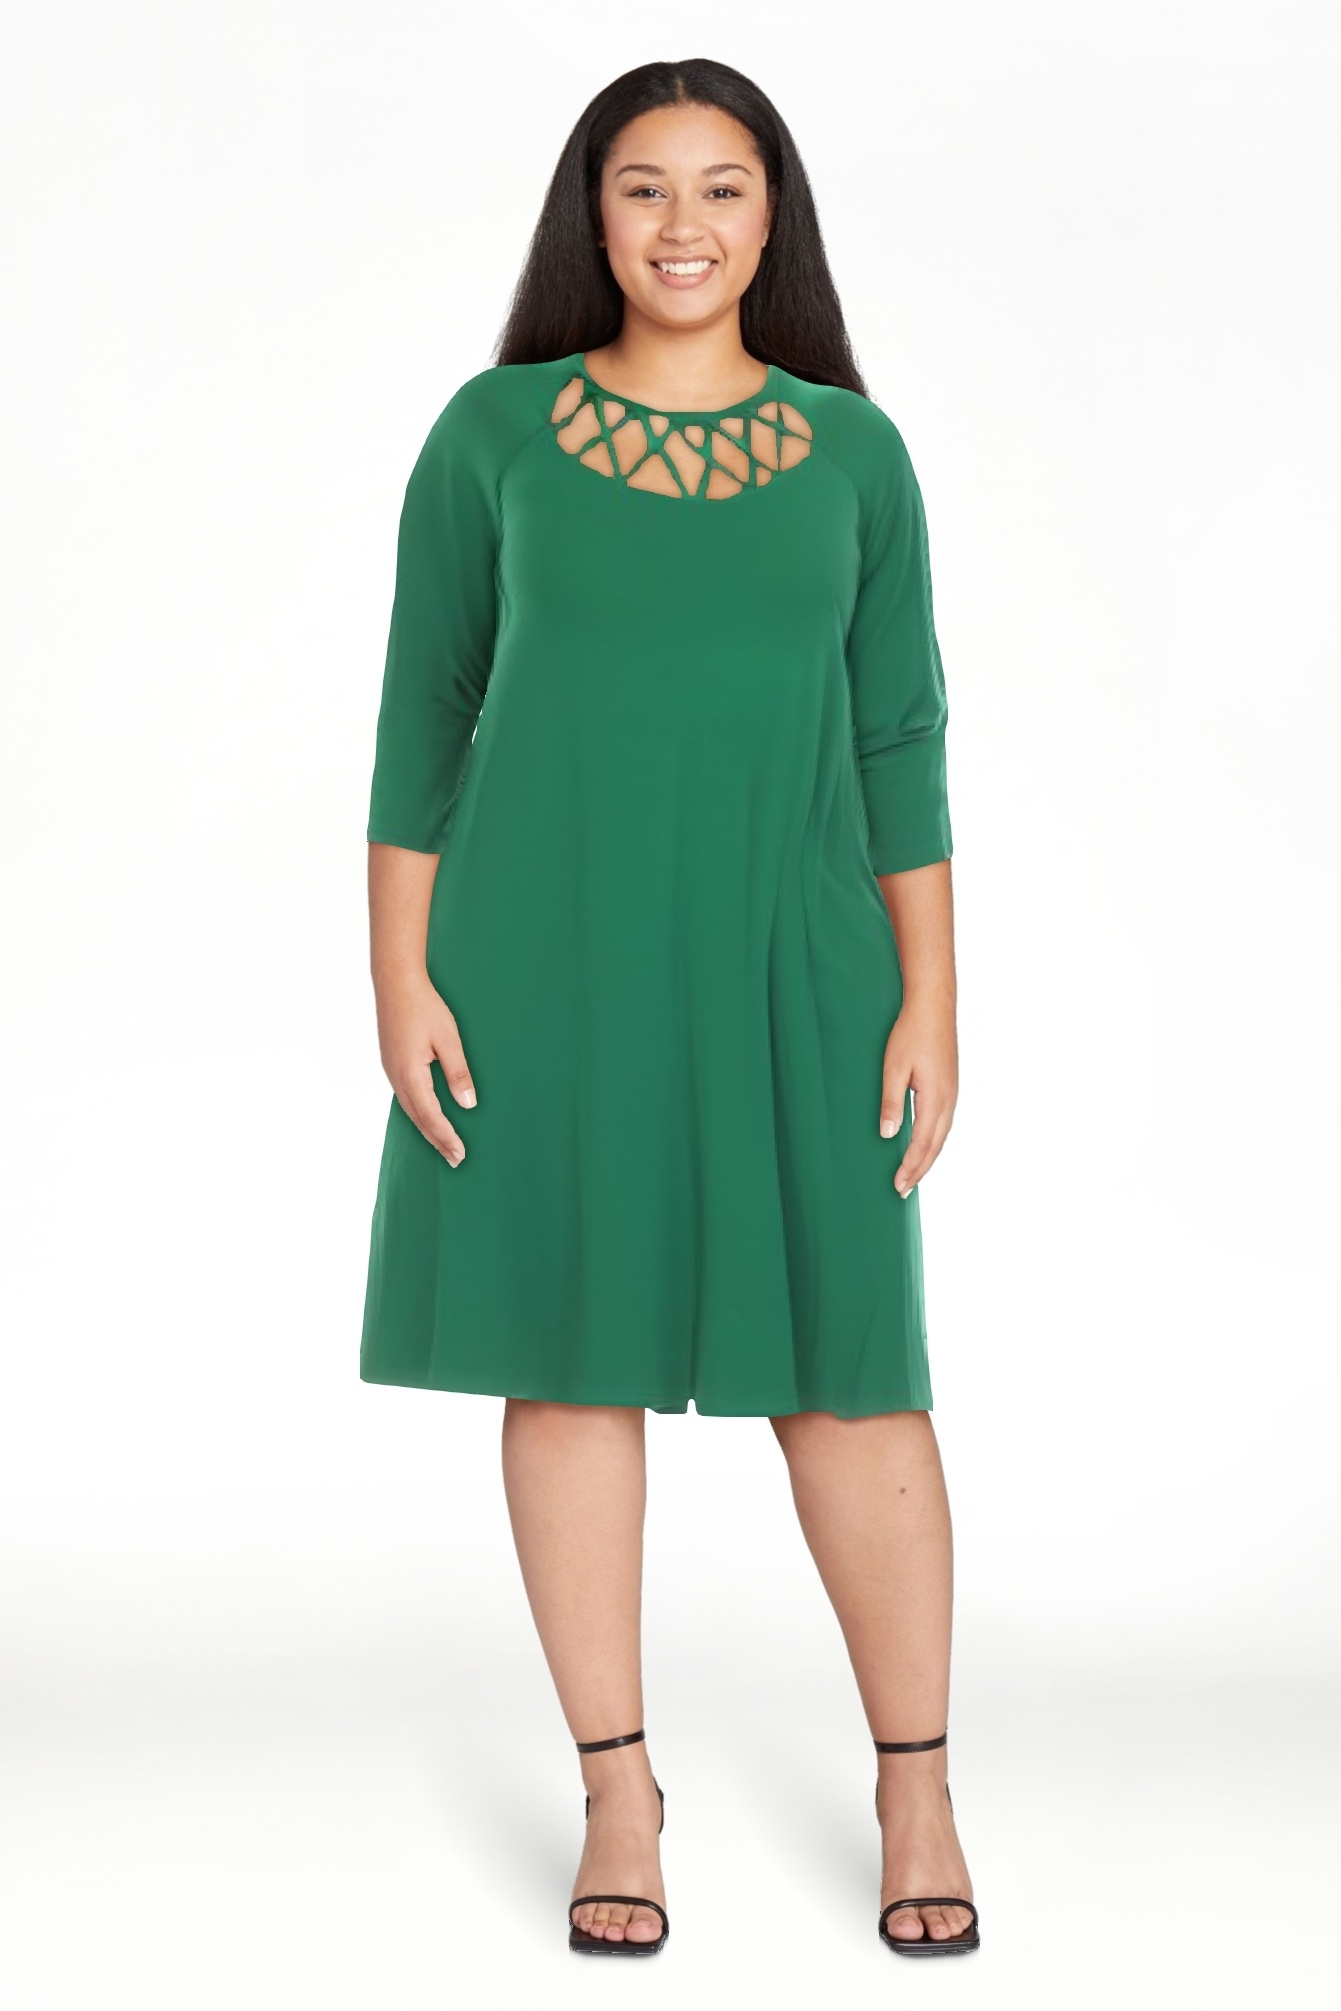 Model in a green dress with a crisscross neckline and three-quarter sleeves, smiling at the camera